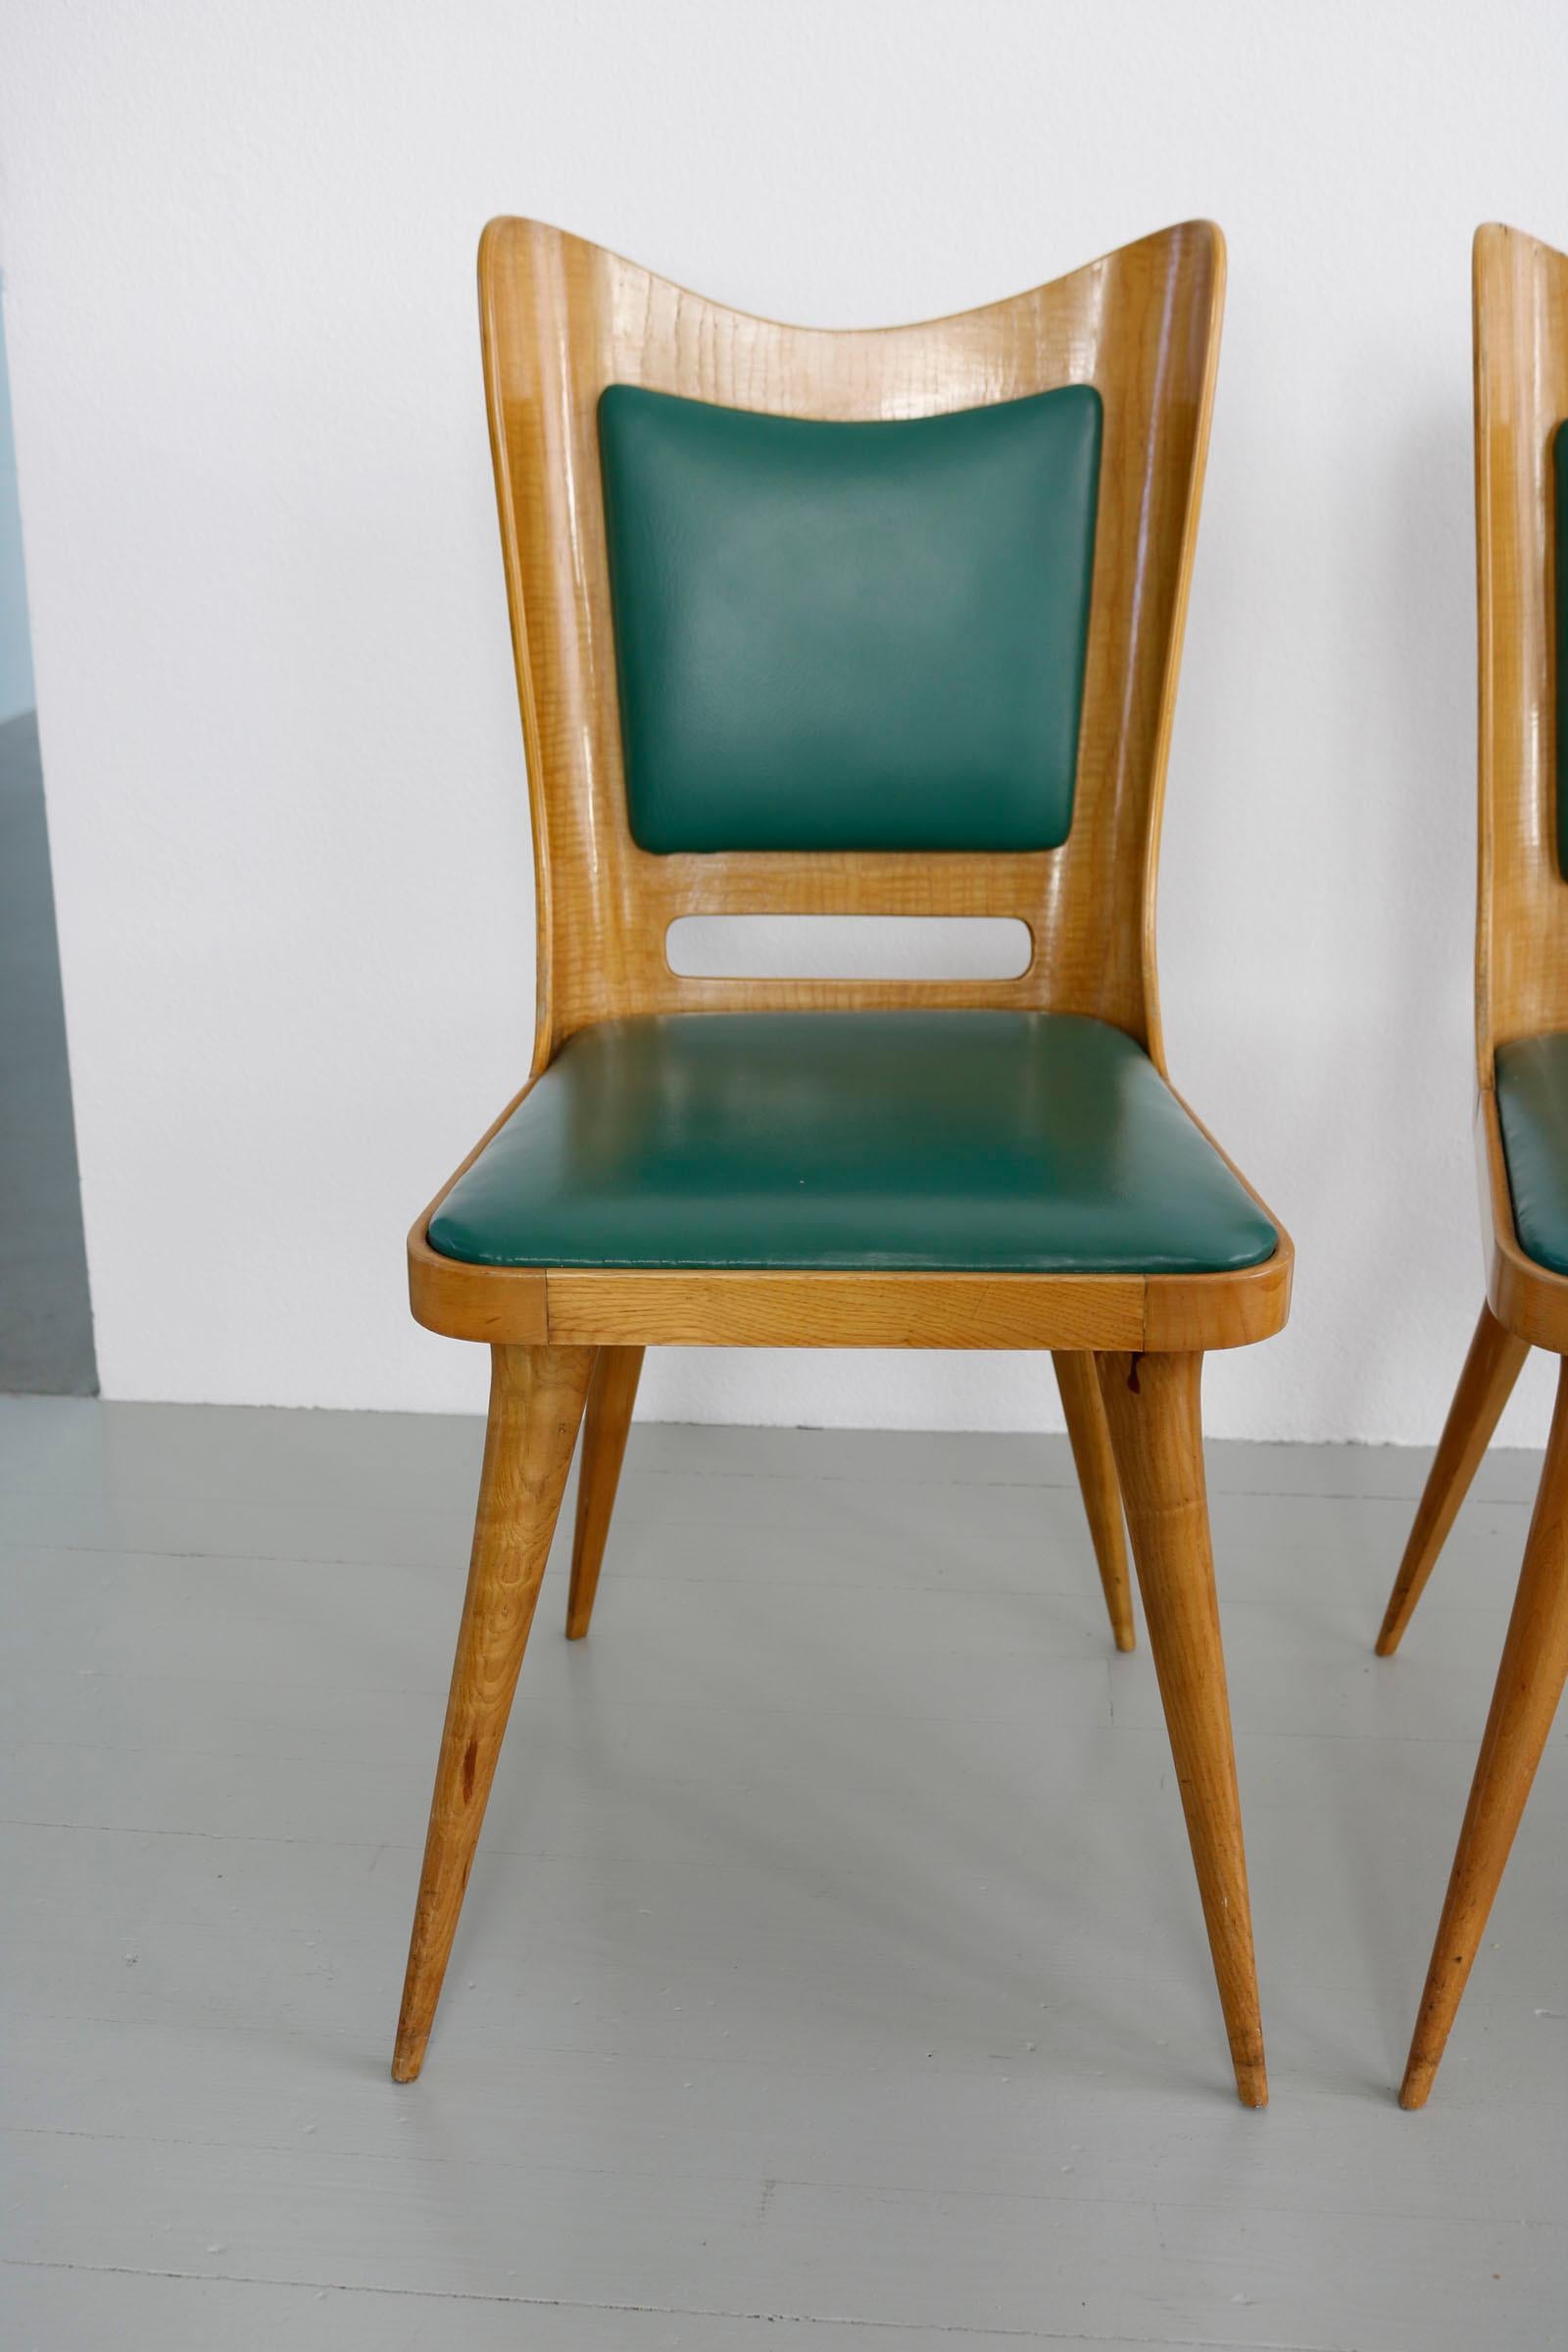 Set of Six Italian Wooden Dining Chairs with Green Upholstery, 1950 For Sale 10